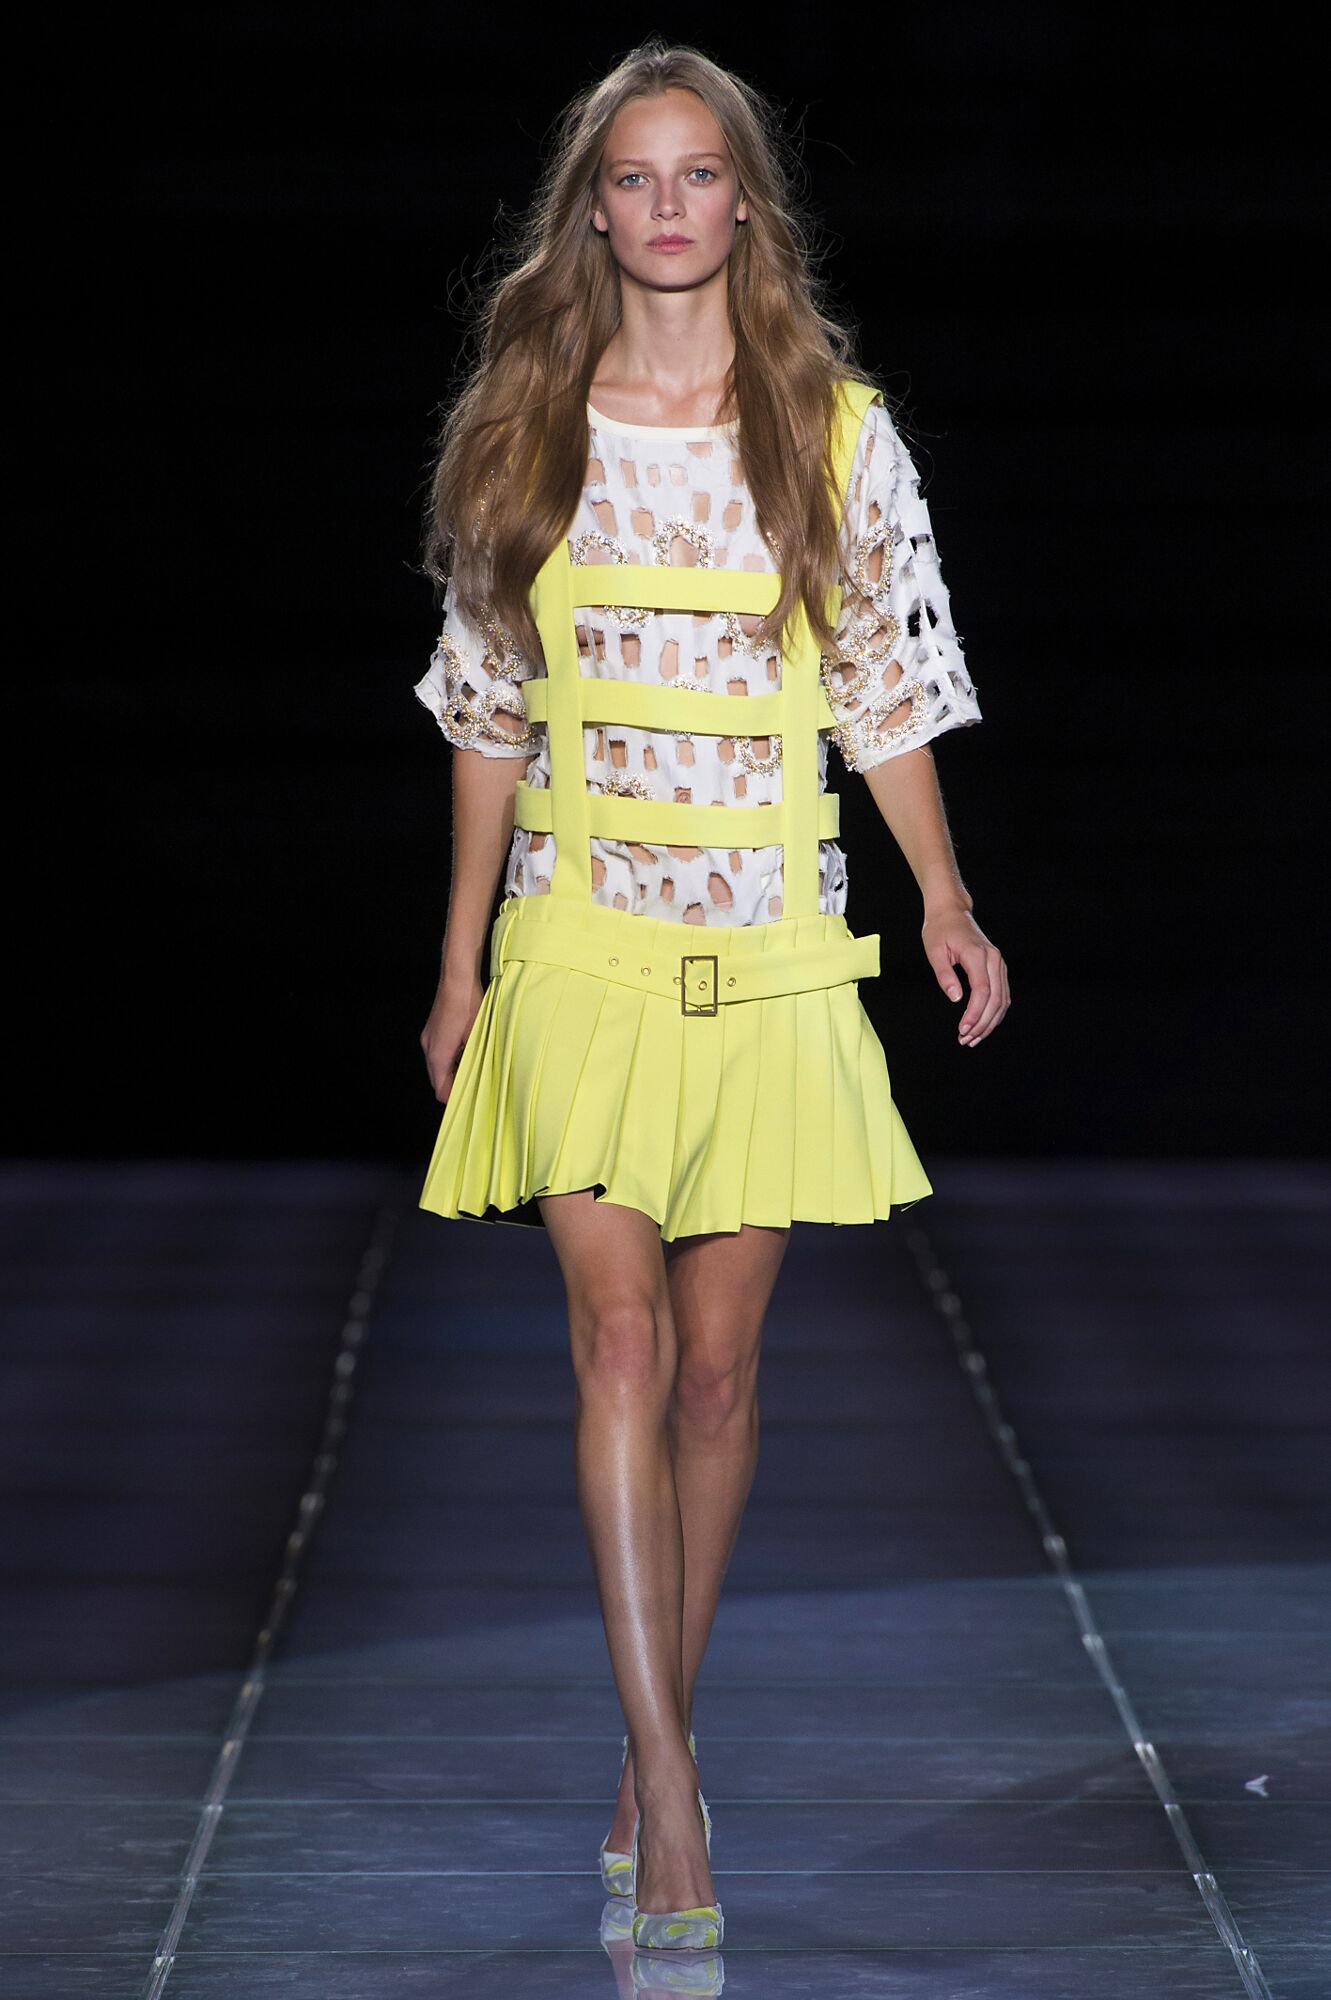 FAUSTO PUGLISI SPRING SUMMER 2015 WOMEN’S COLLECTION | The Skinny Beep